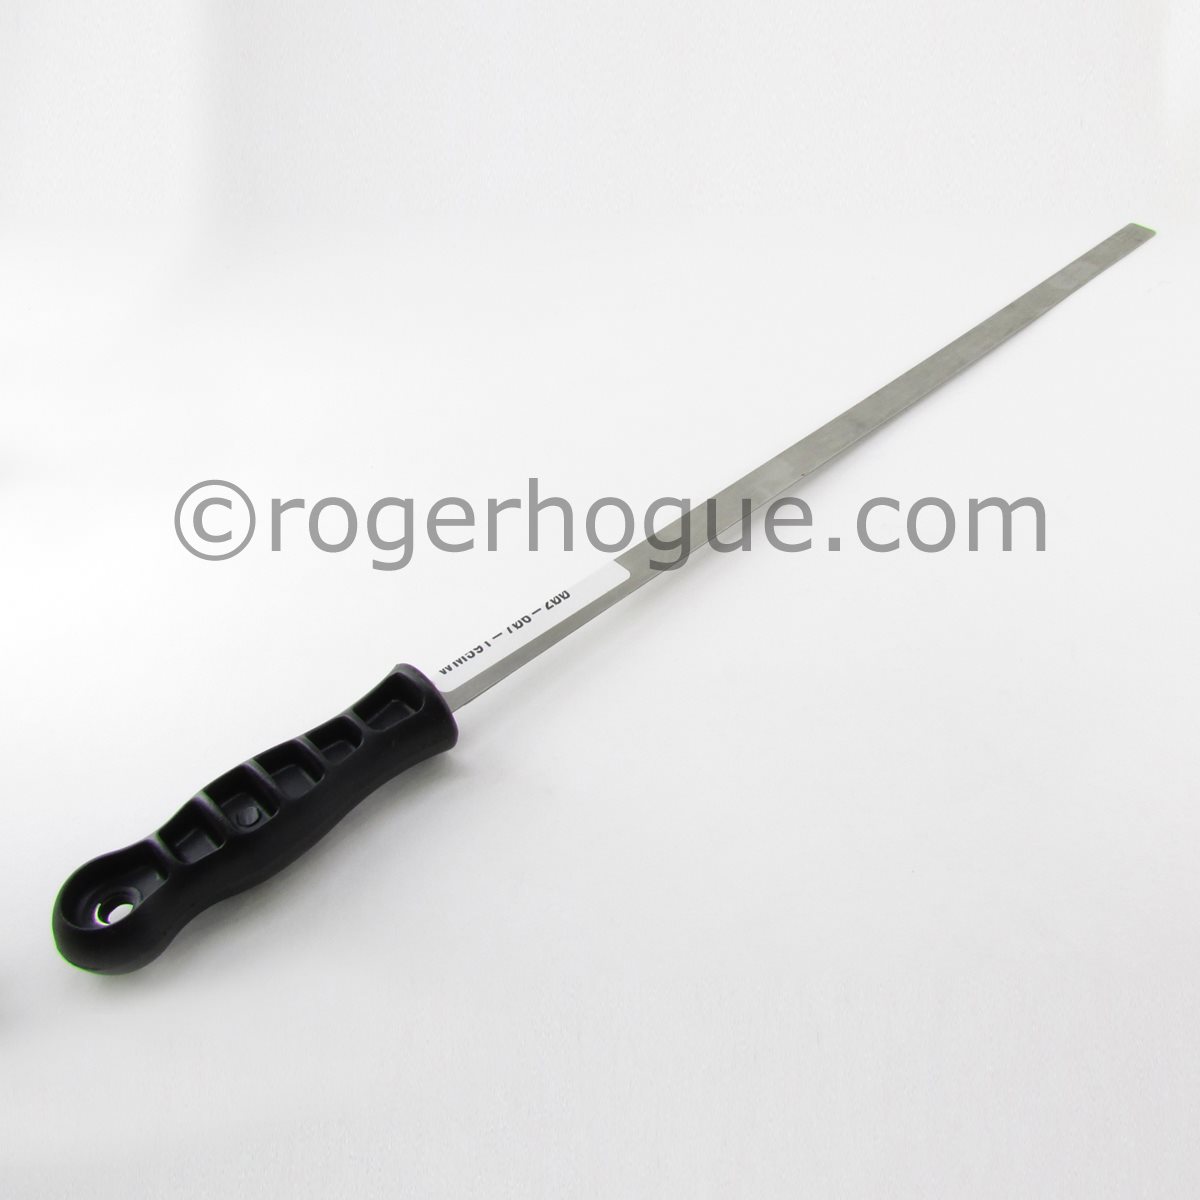 CLEANING TOOL FOR HEAT EXCHANGER (18.25'' LONG BLADE)